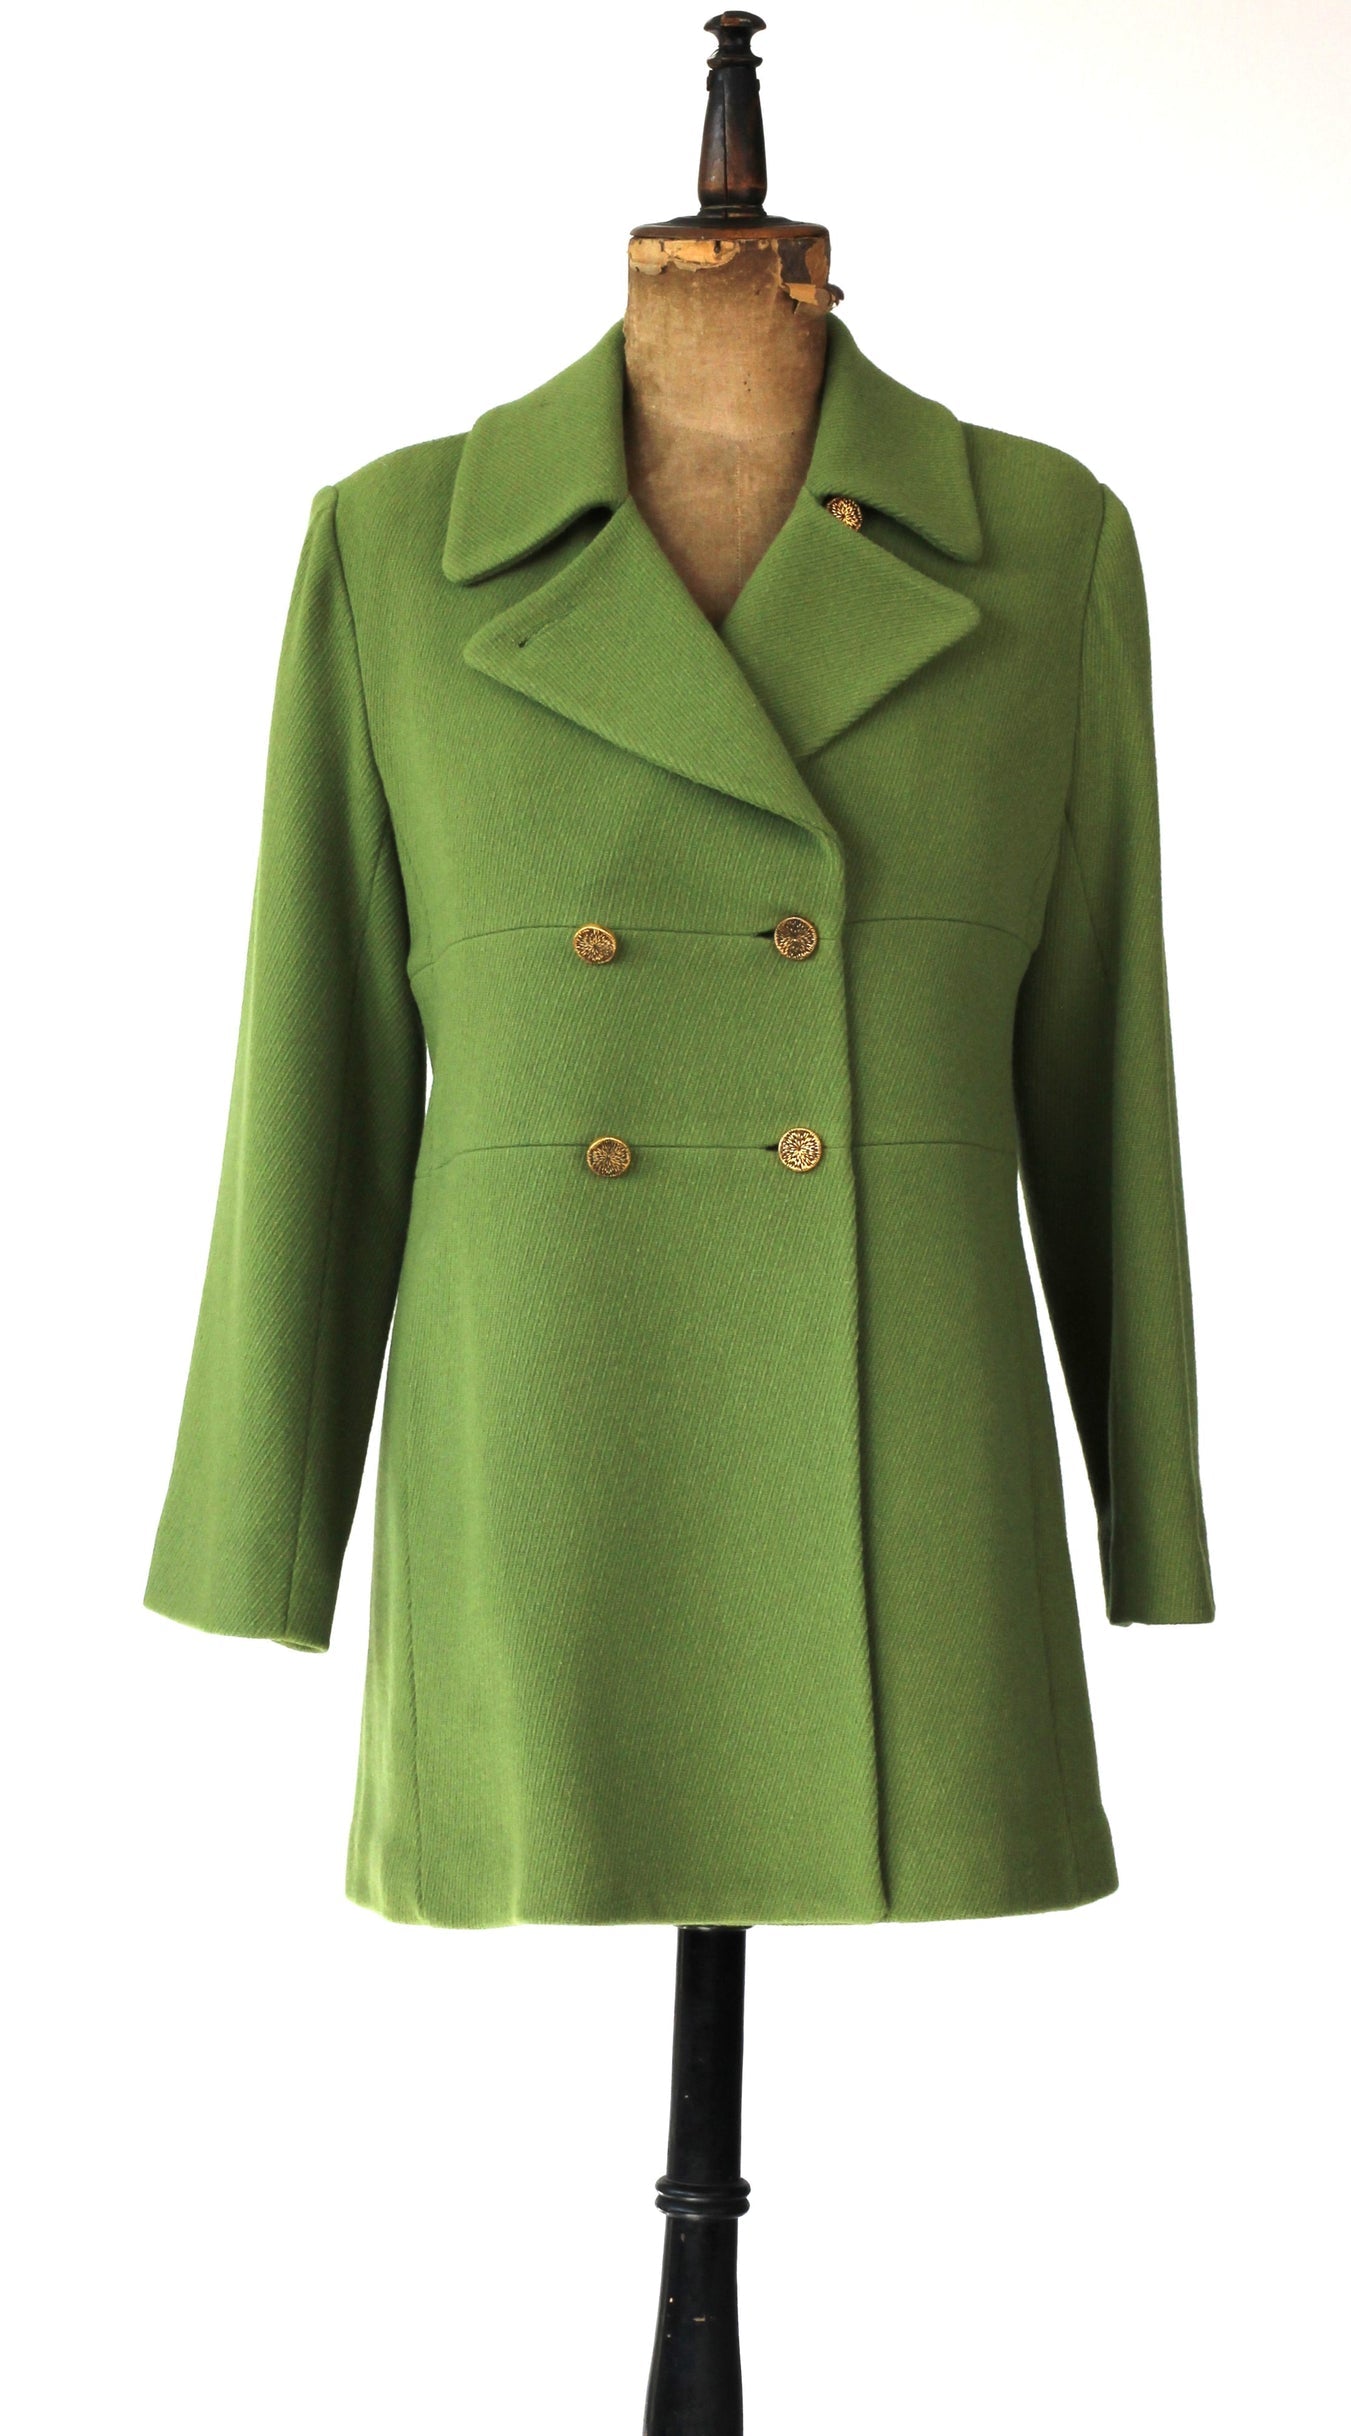 1990s Vintage Lime Green Double Breast Coat//Size M/L